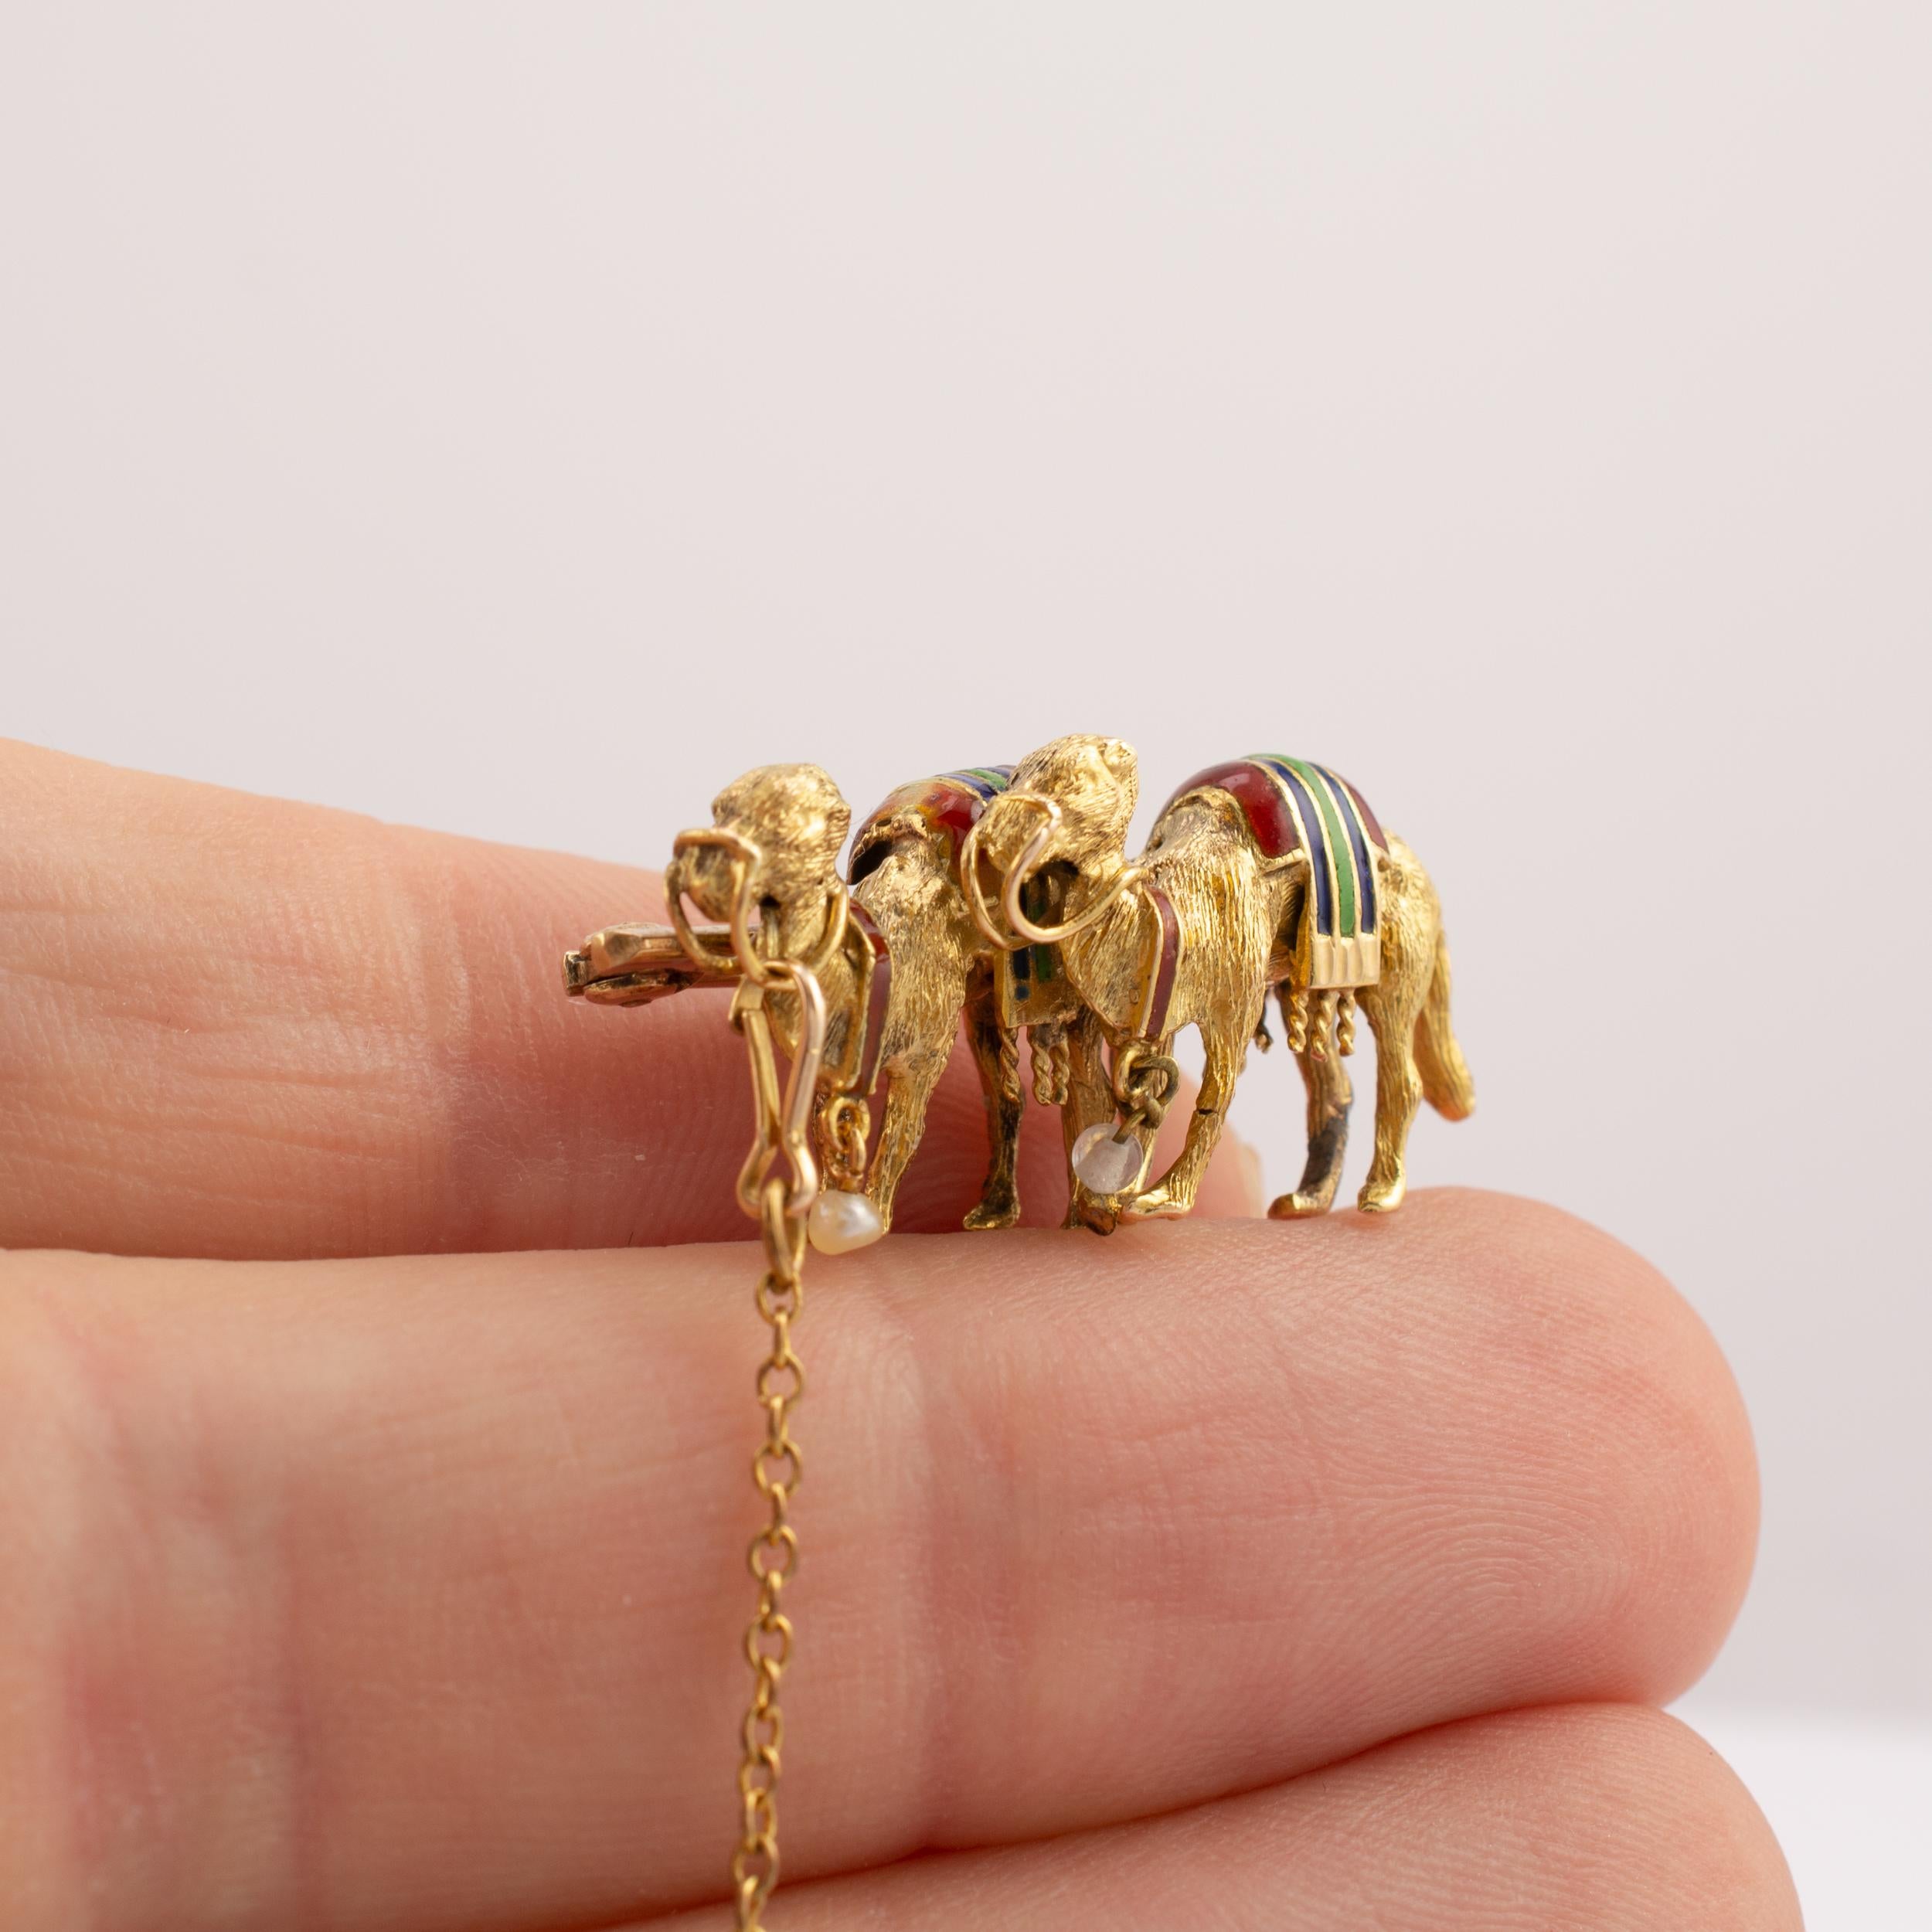  18 Karat Gold Camel Brooch With Enamel Pearl, circa 1940s For Sale 2